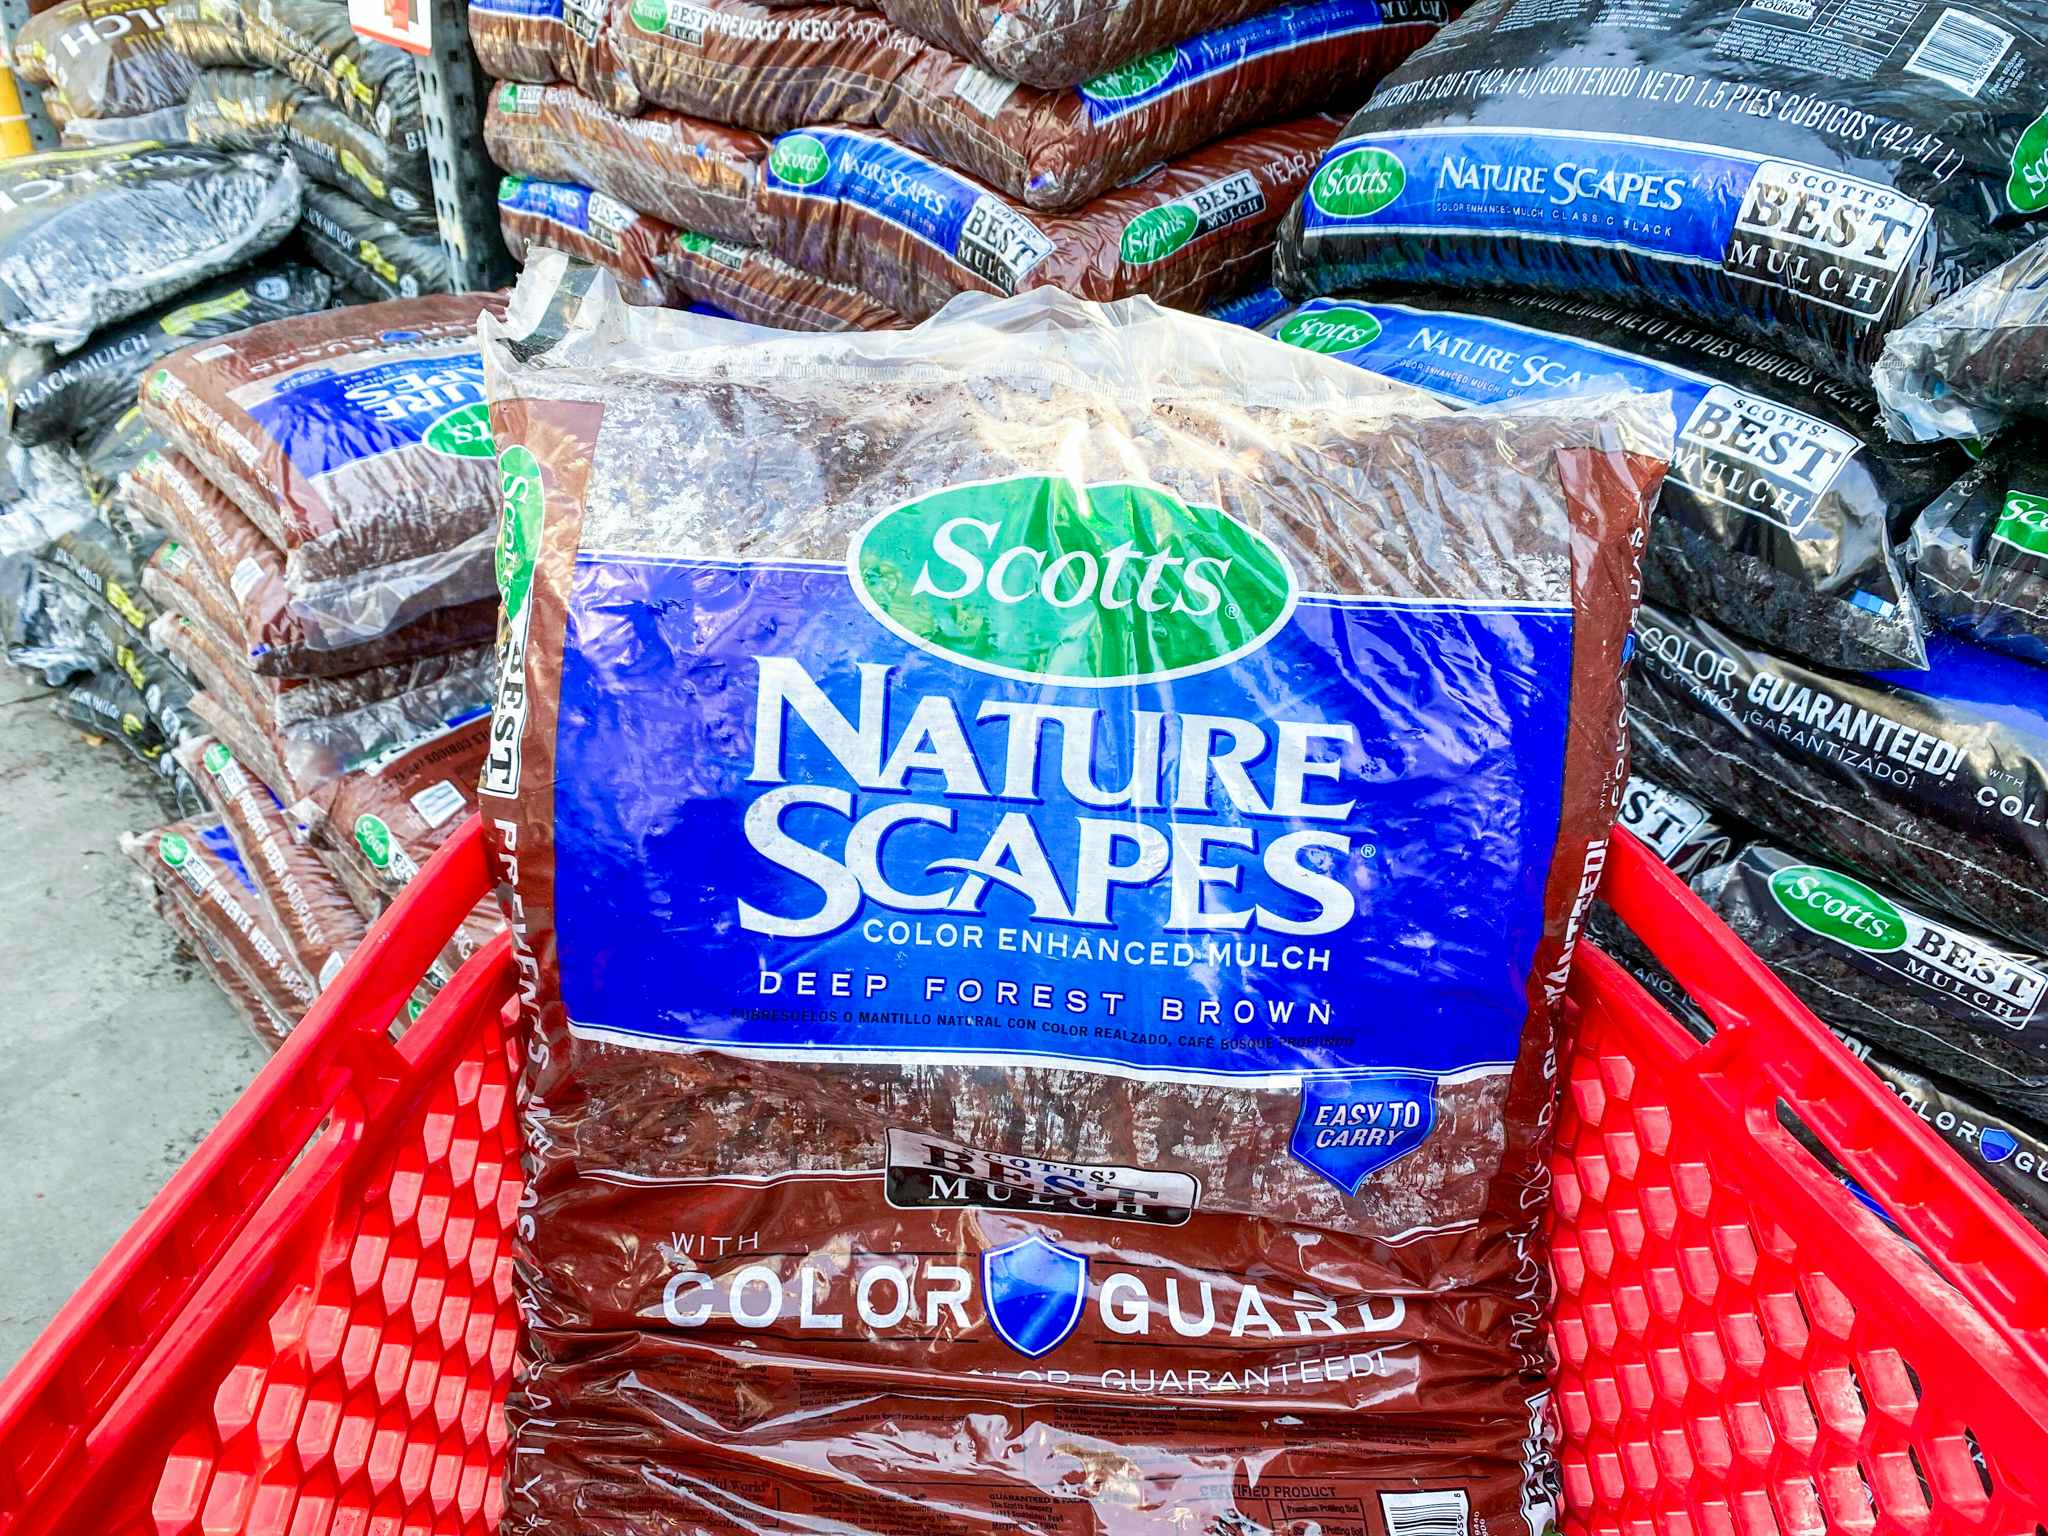 Scotts Nature Scapes Mulch at Lowe's